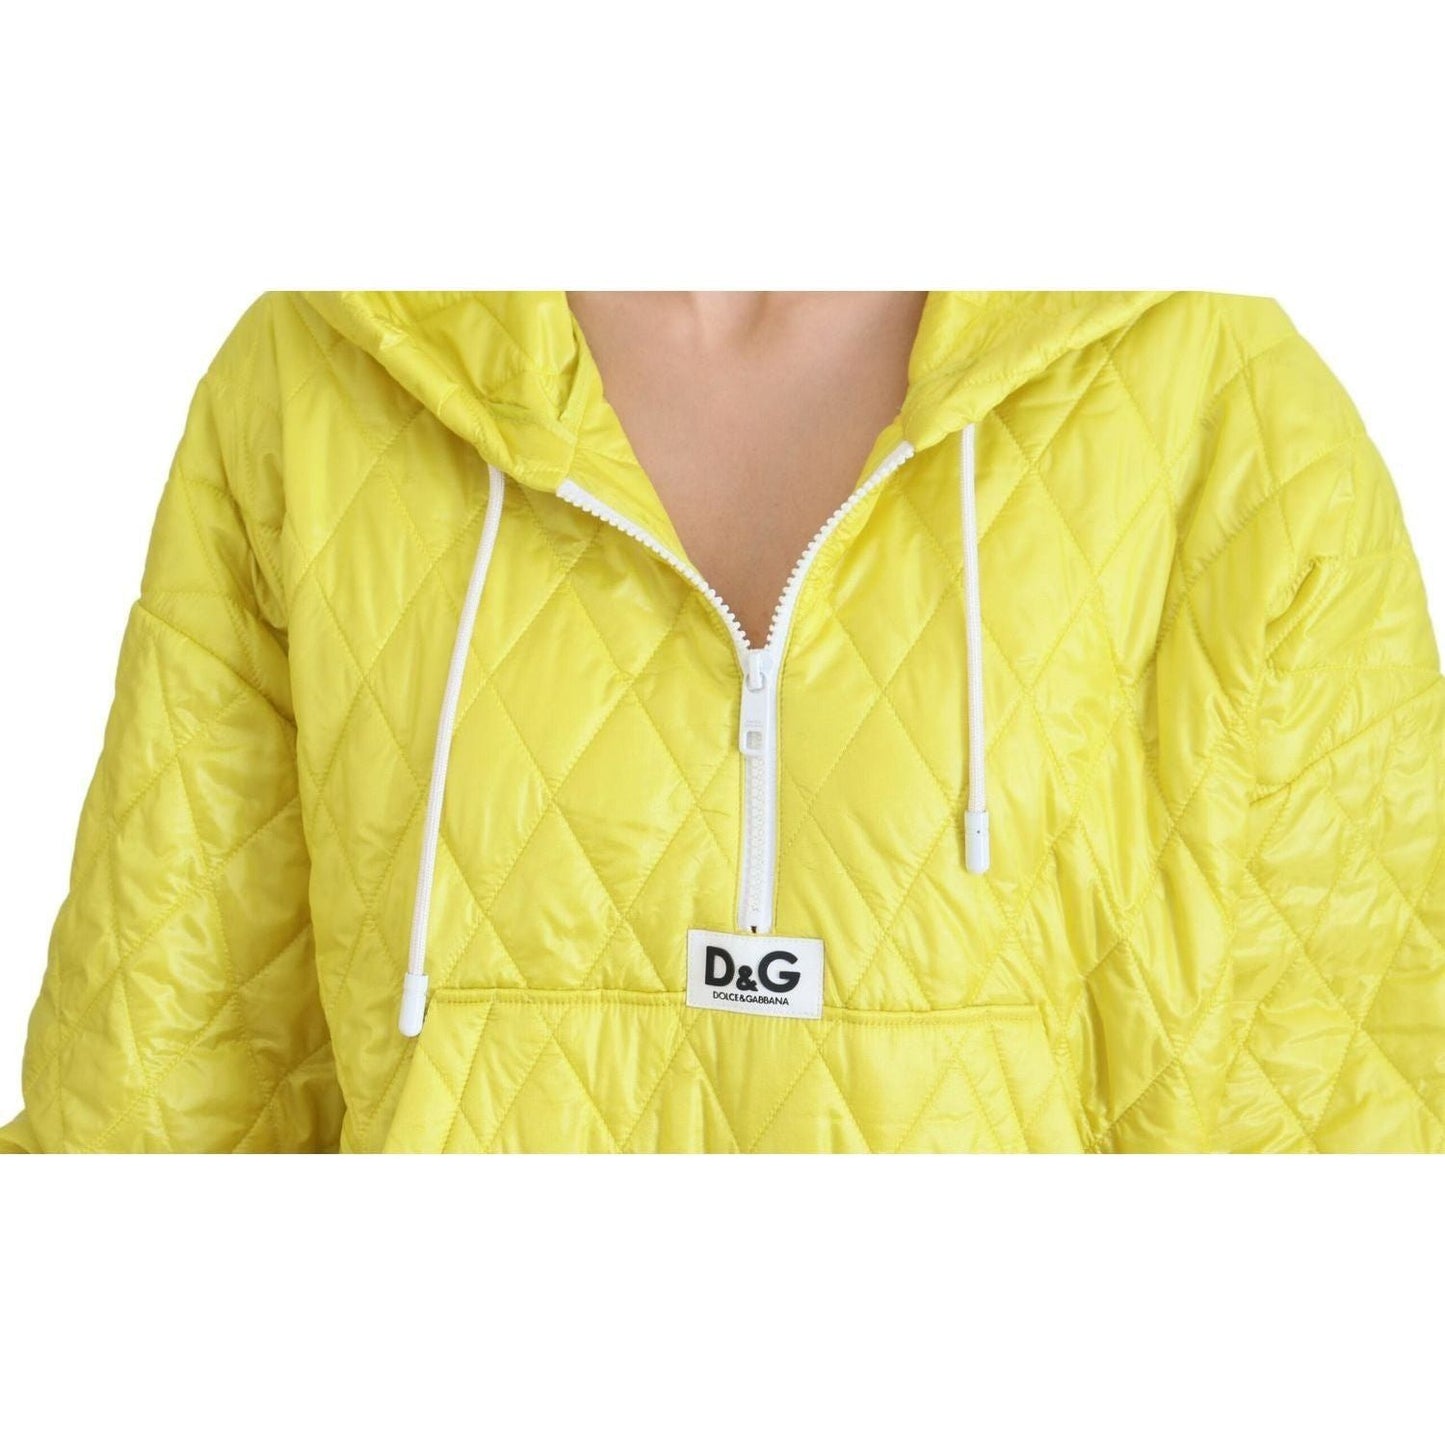 Dolce & Gabbana Elegant Yellow Hooded Jacket yellow-nylon-quilted-hooded-pullover-jacket IMG_2765-scaled-74f783c9-9d6.jpg